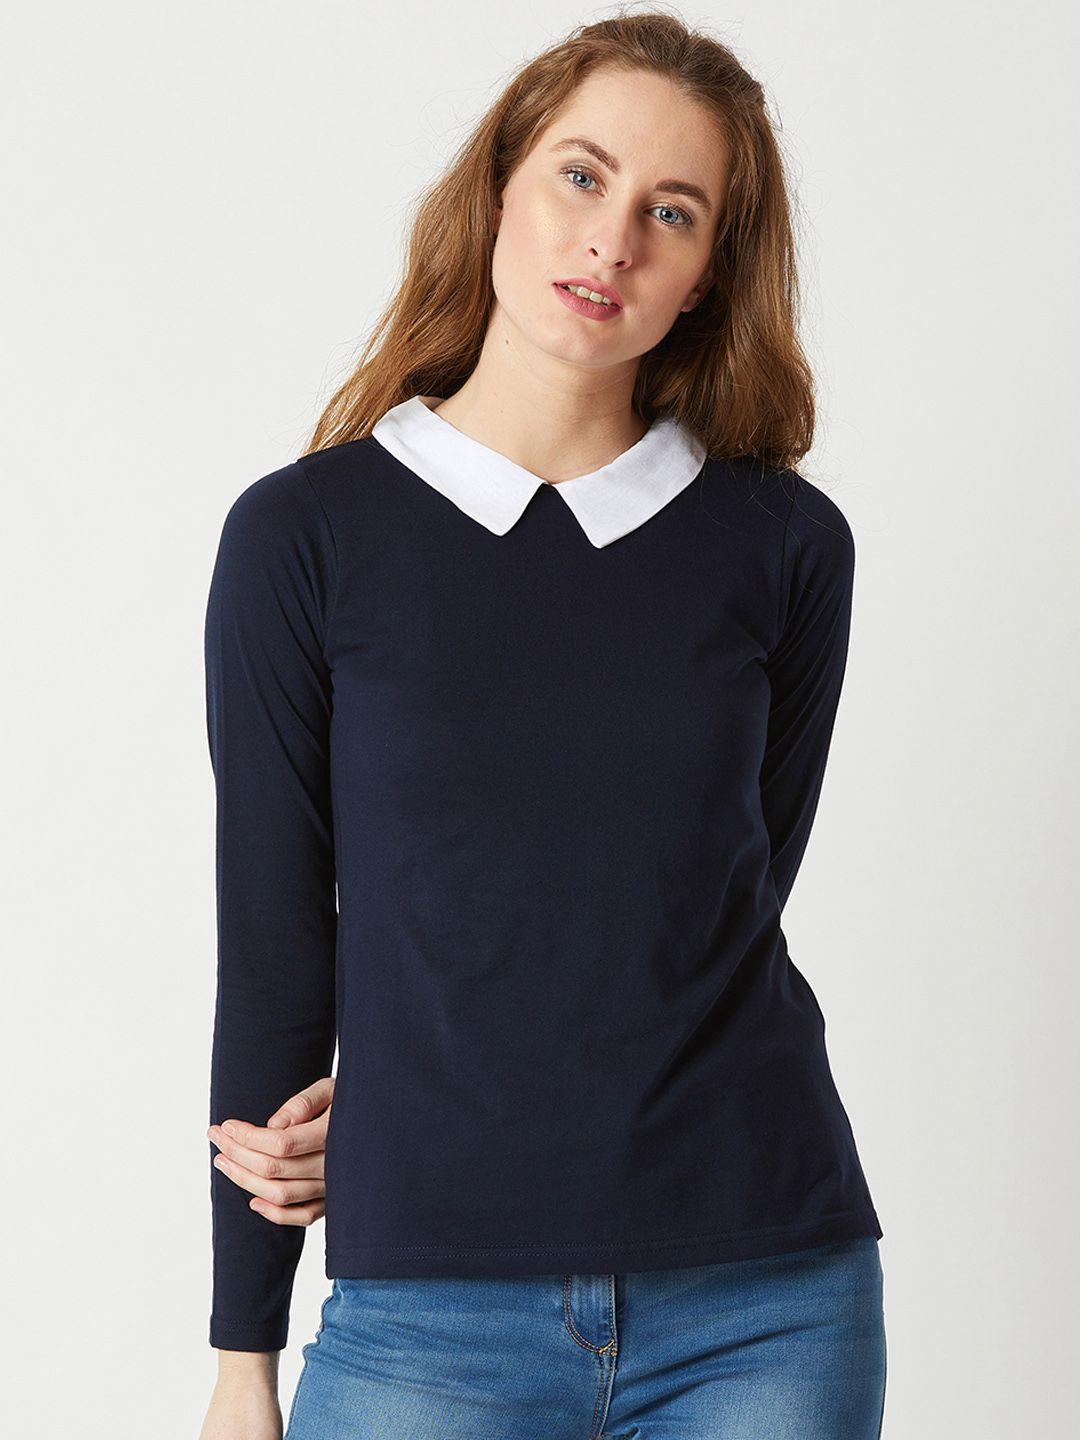 miss-chase-navy-blue-pure-cotton-top